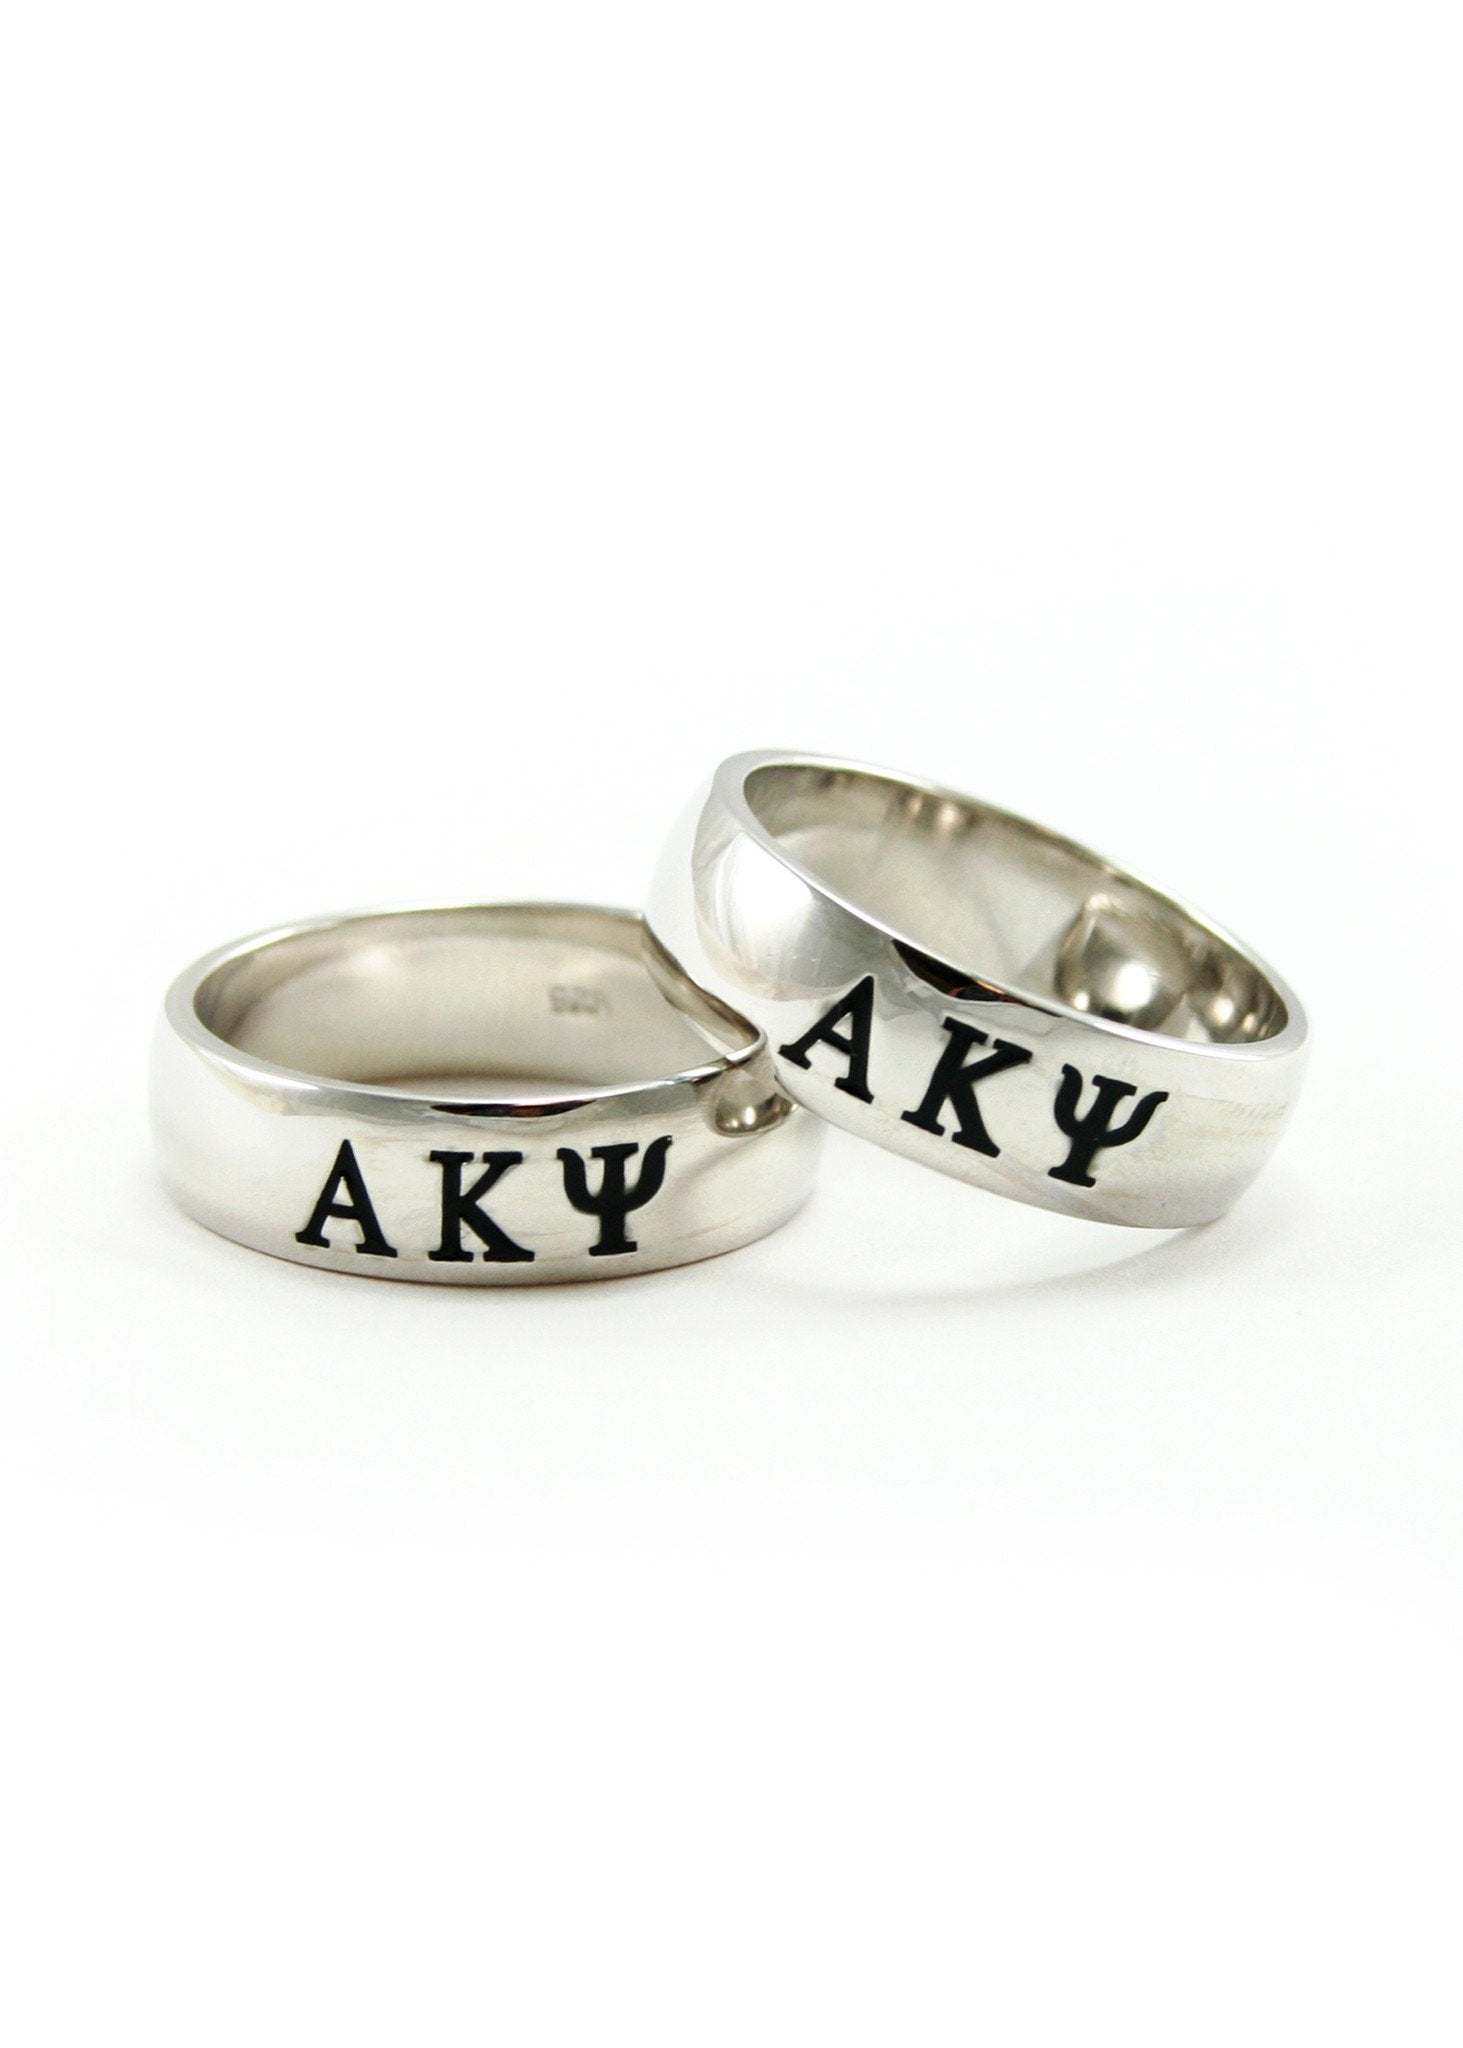 The Collegiate Standard Kappa Sigma Sterling Silver Ring with Engraved  Badge Insignia (9.0)|Amazon.com